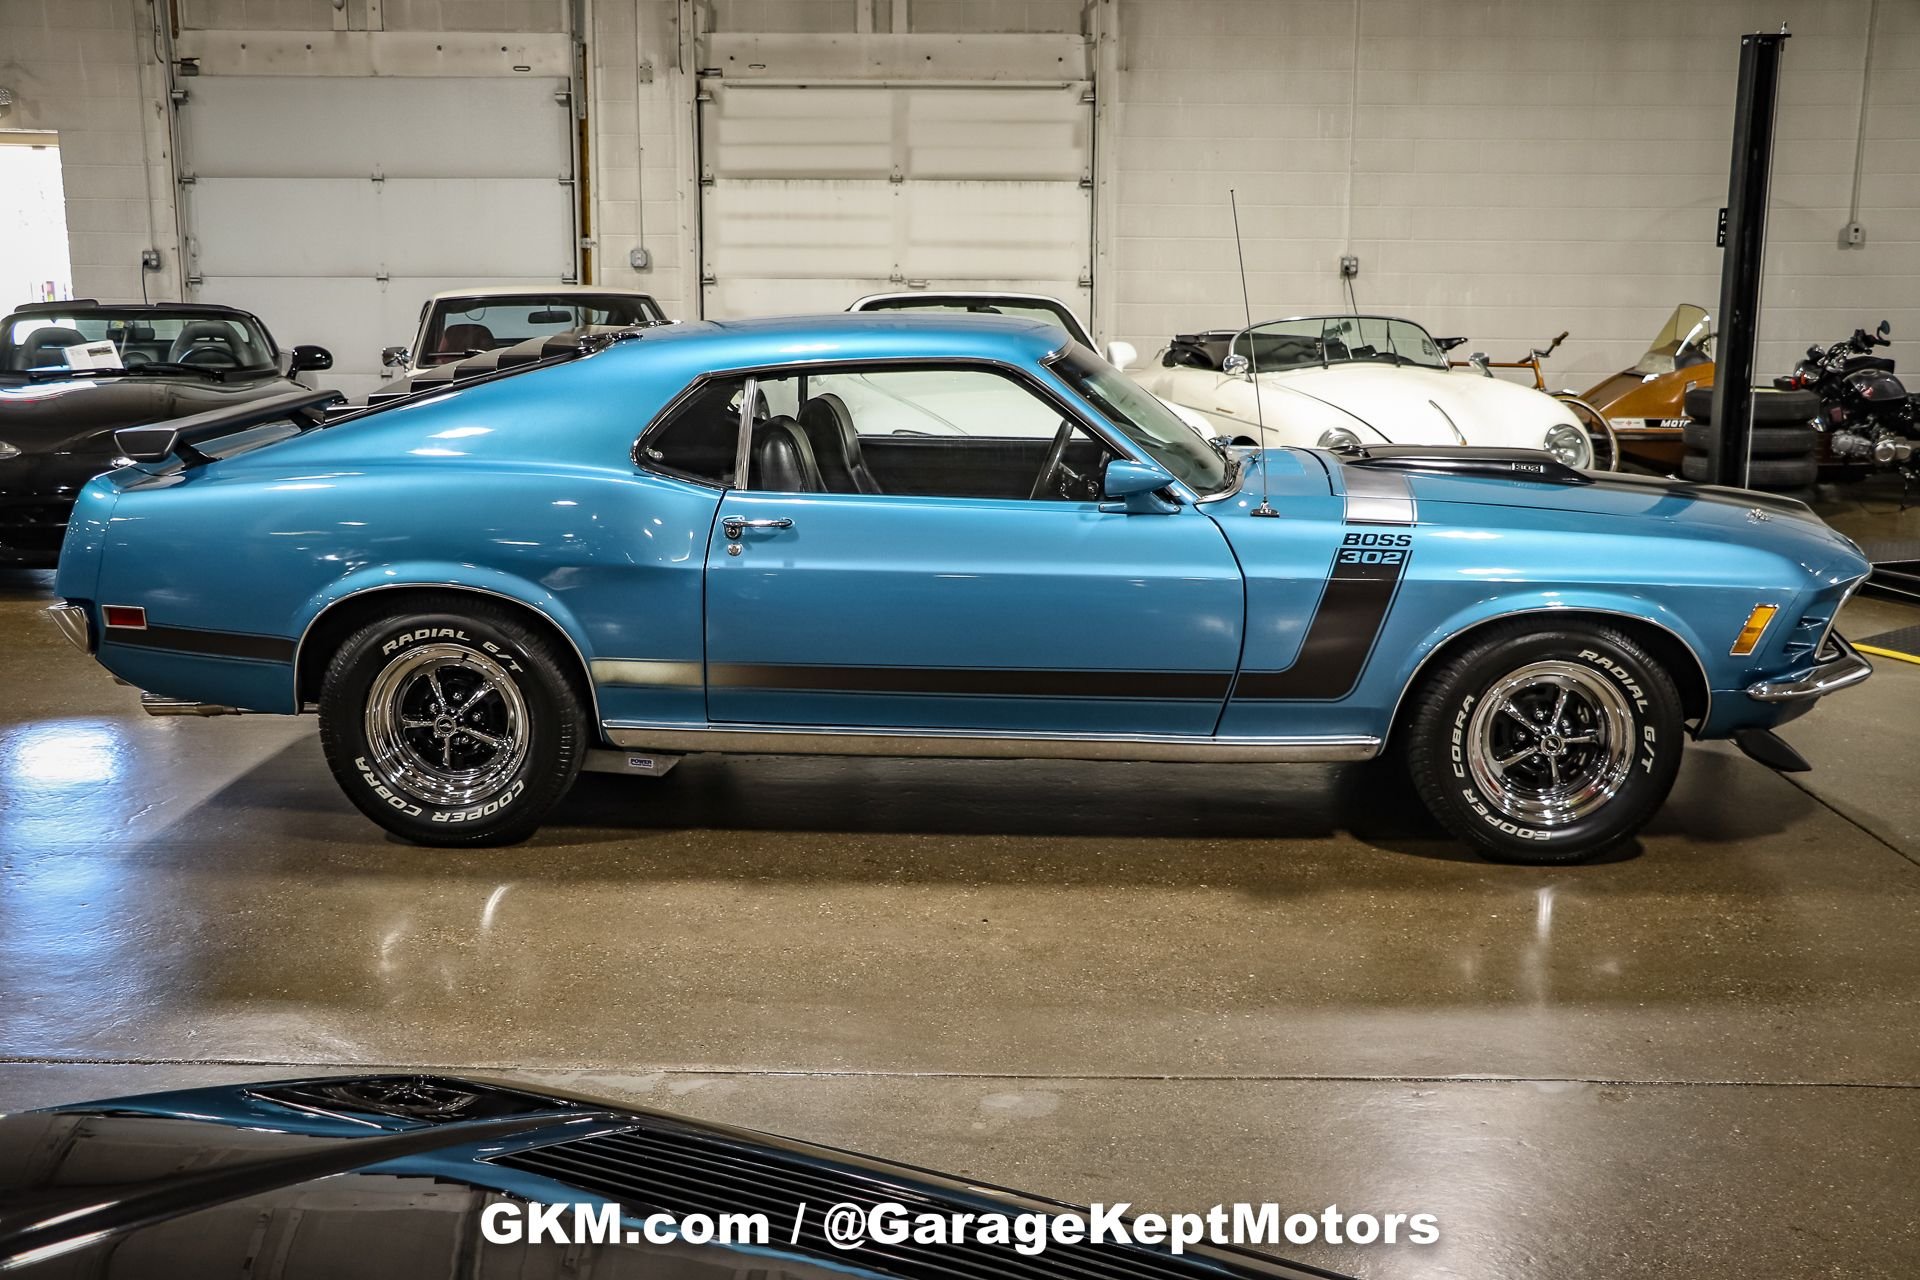 1970 Ford Mustang Boss 302 Tribute Will Not Make You Feel Blue About ...